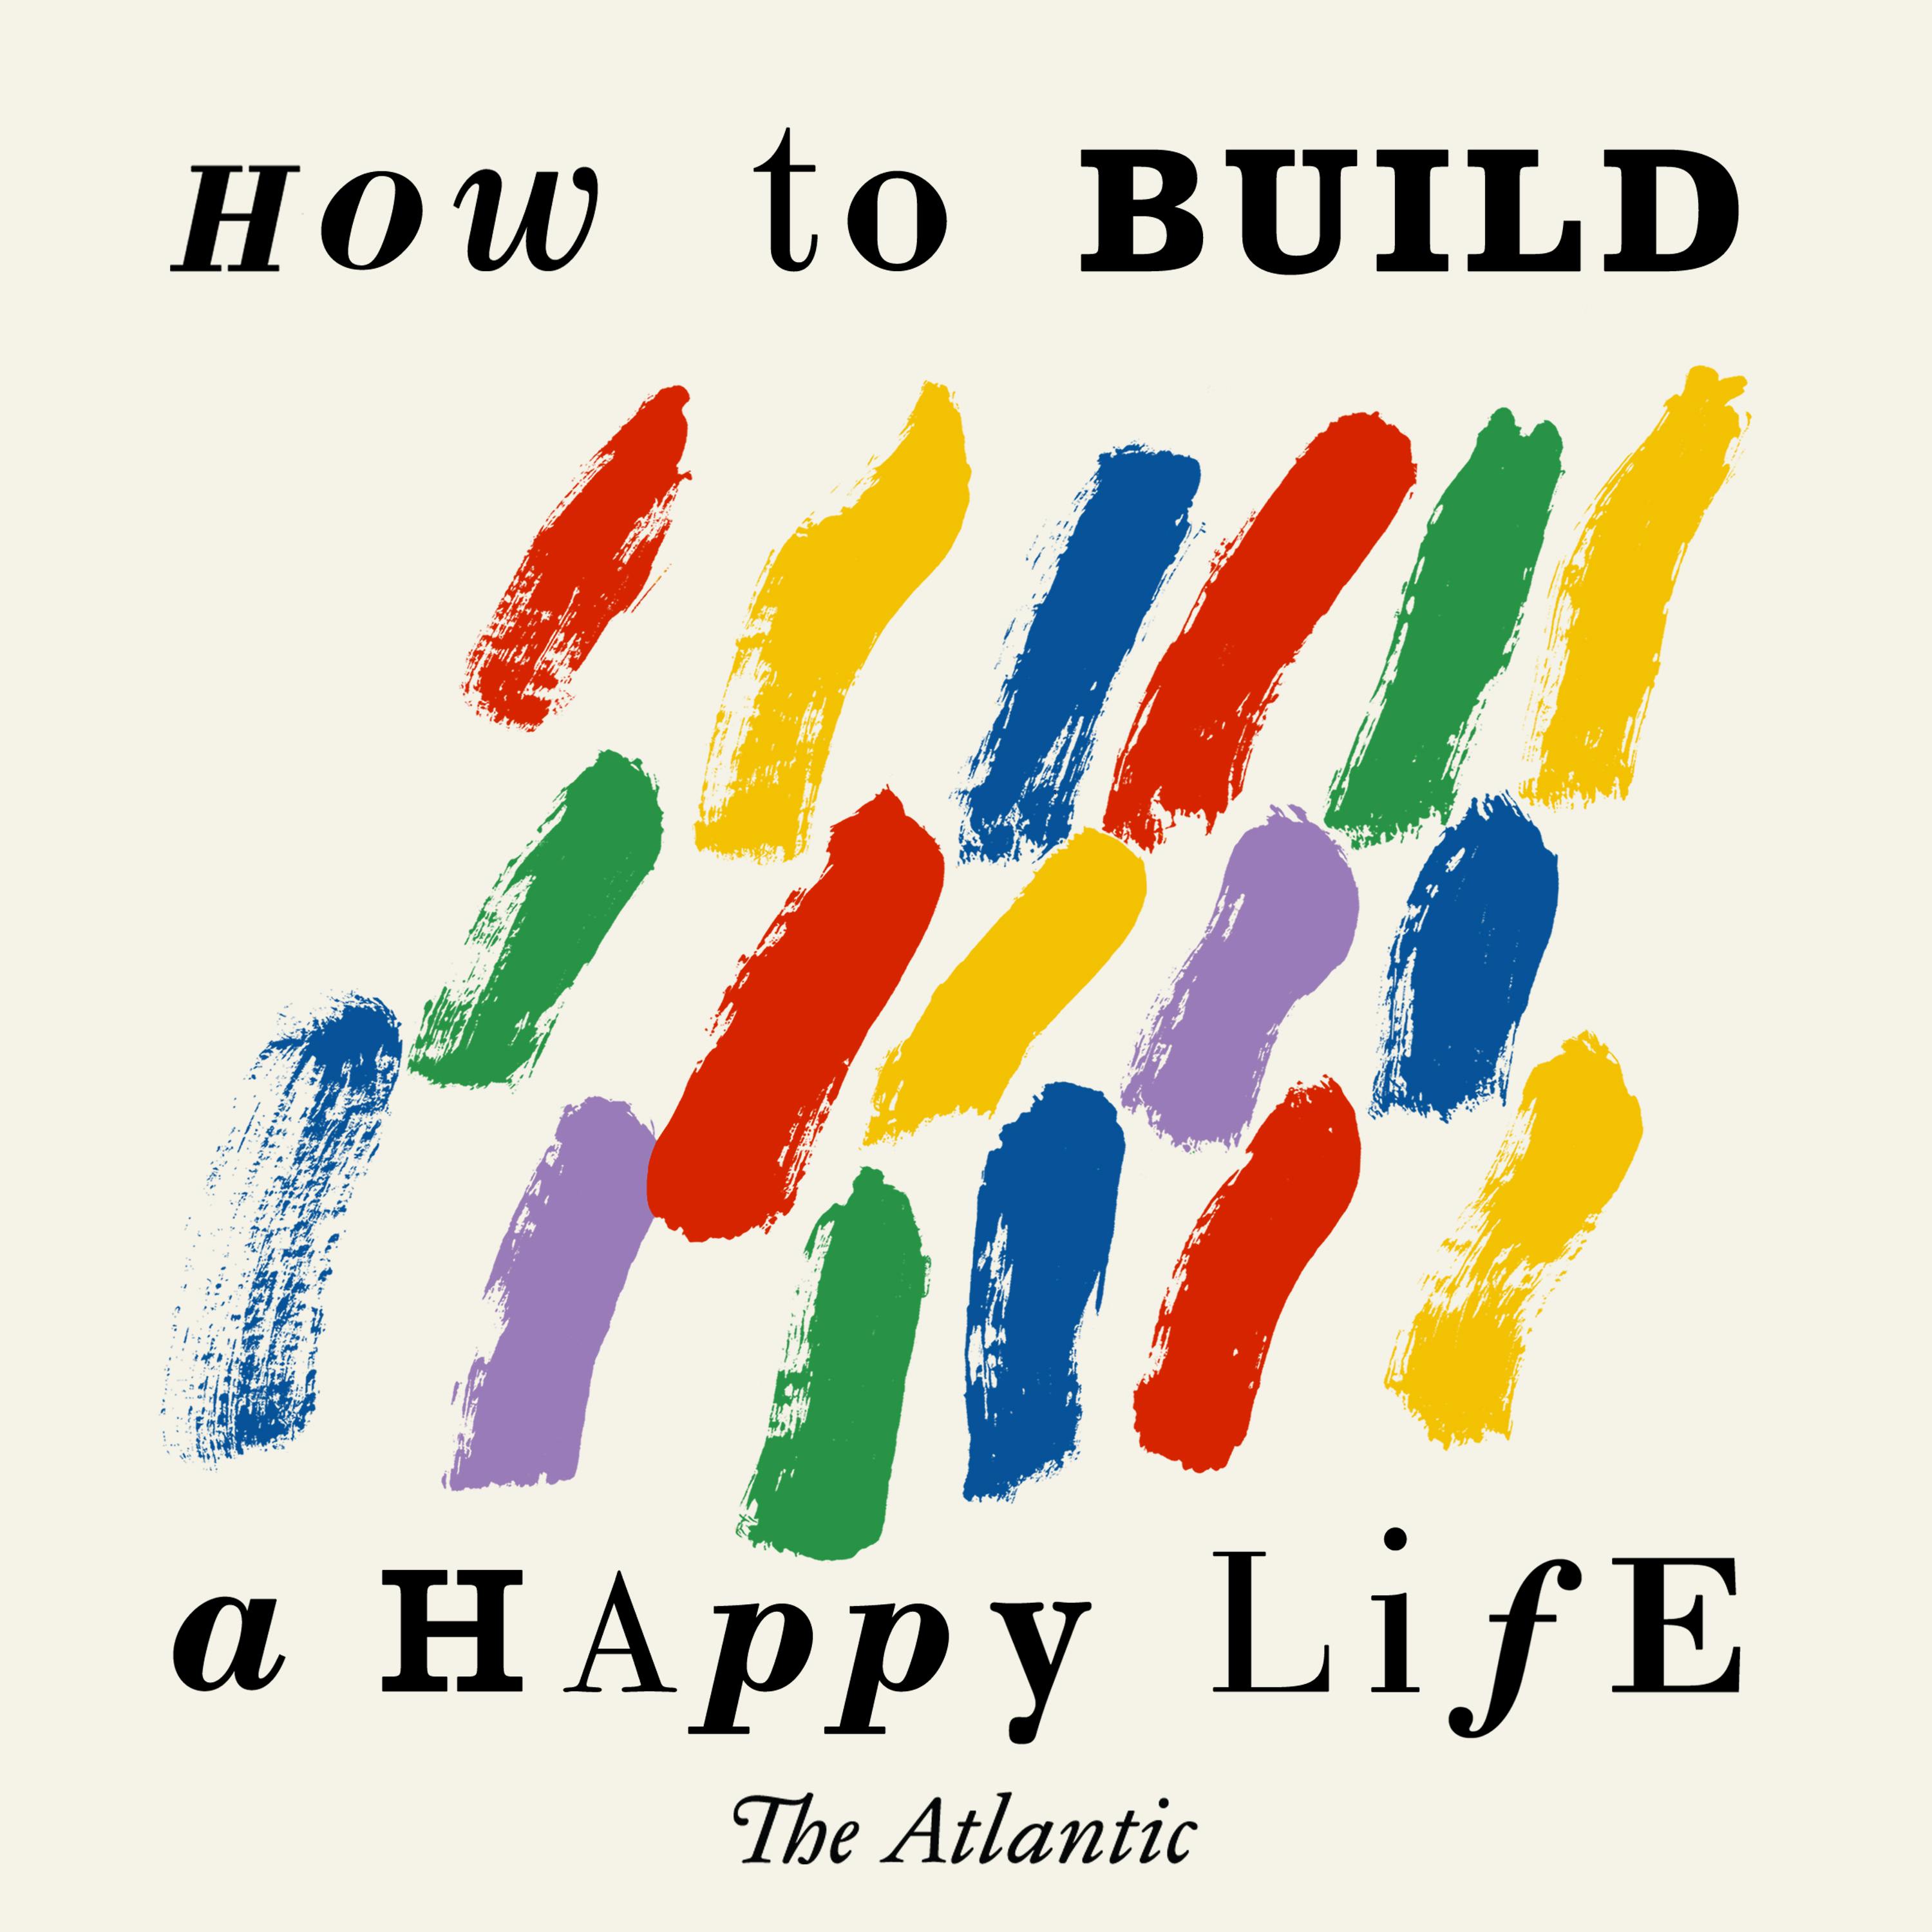 How to Build a Happy Life: Be Self-Aware